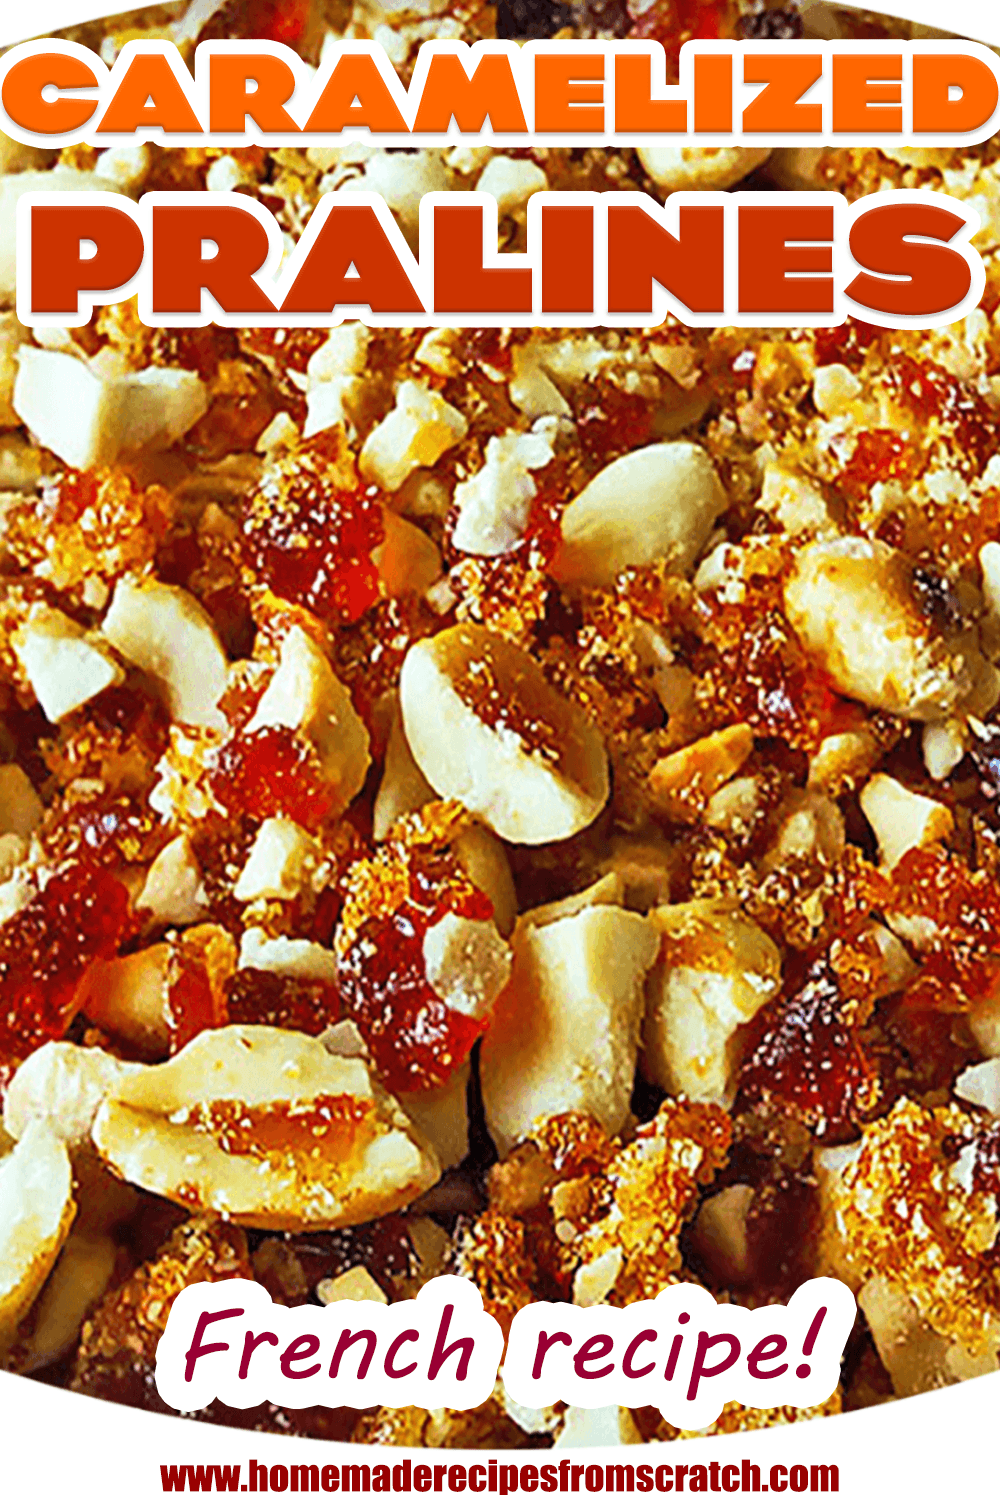 Classic French Caramelized Pralines